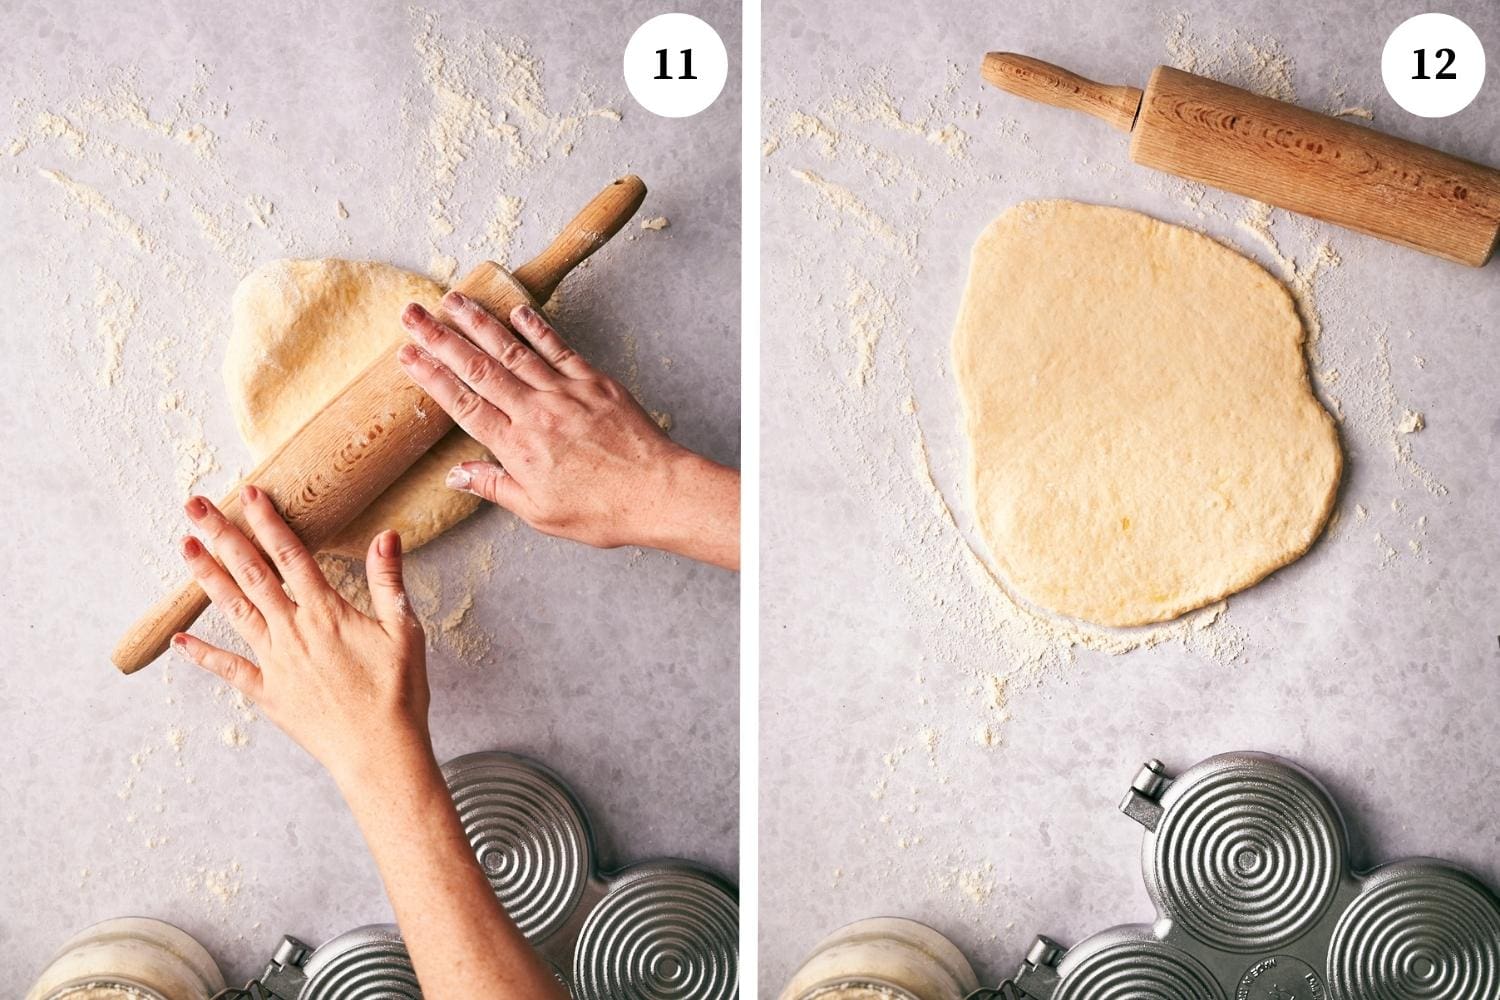 Process of making Tigelle Foccaccine Bread: Use a rolling pin (with a little flour on it) to roll out until the dough is 8 mm thick. 